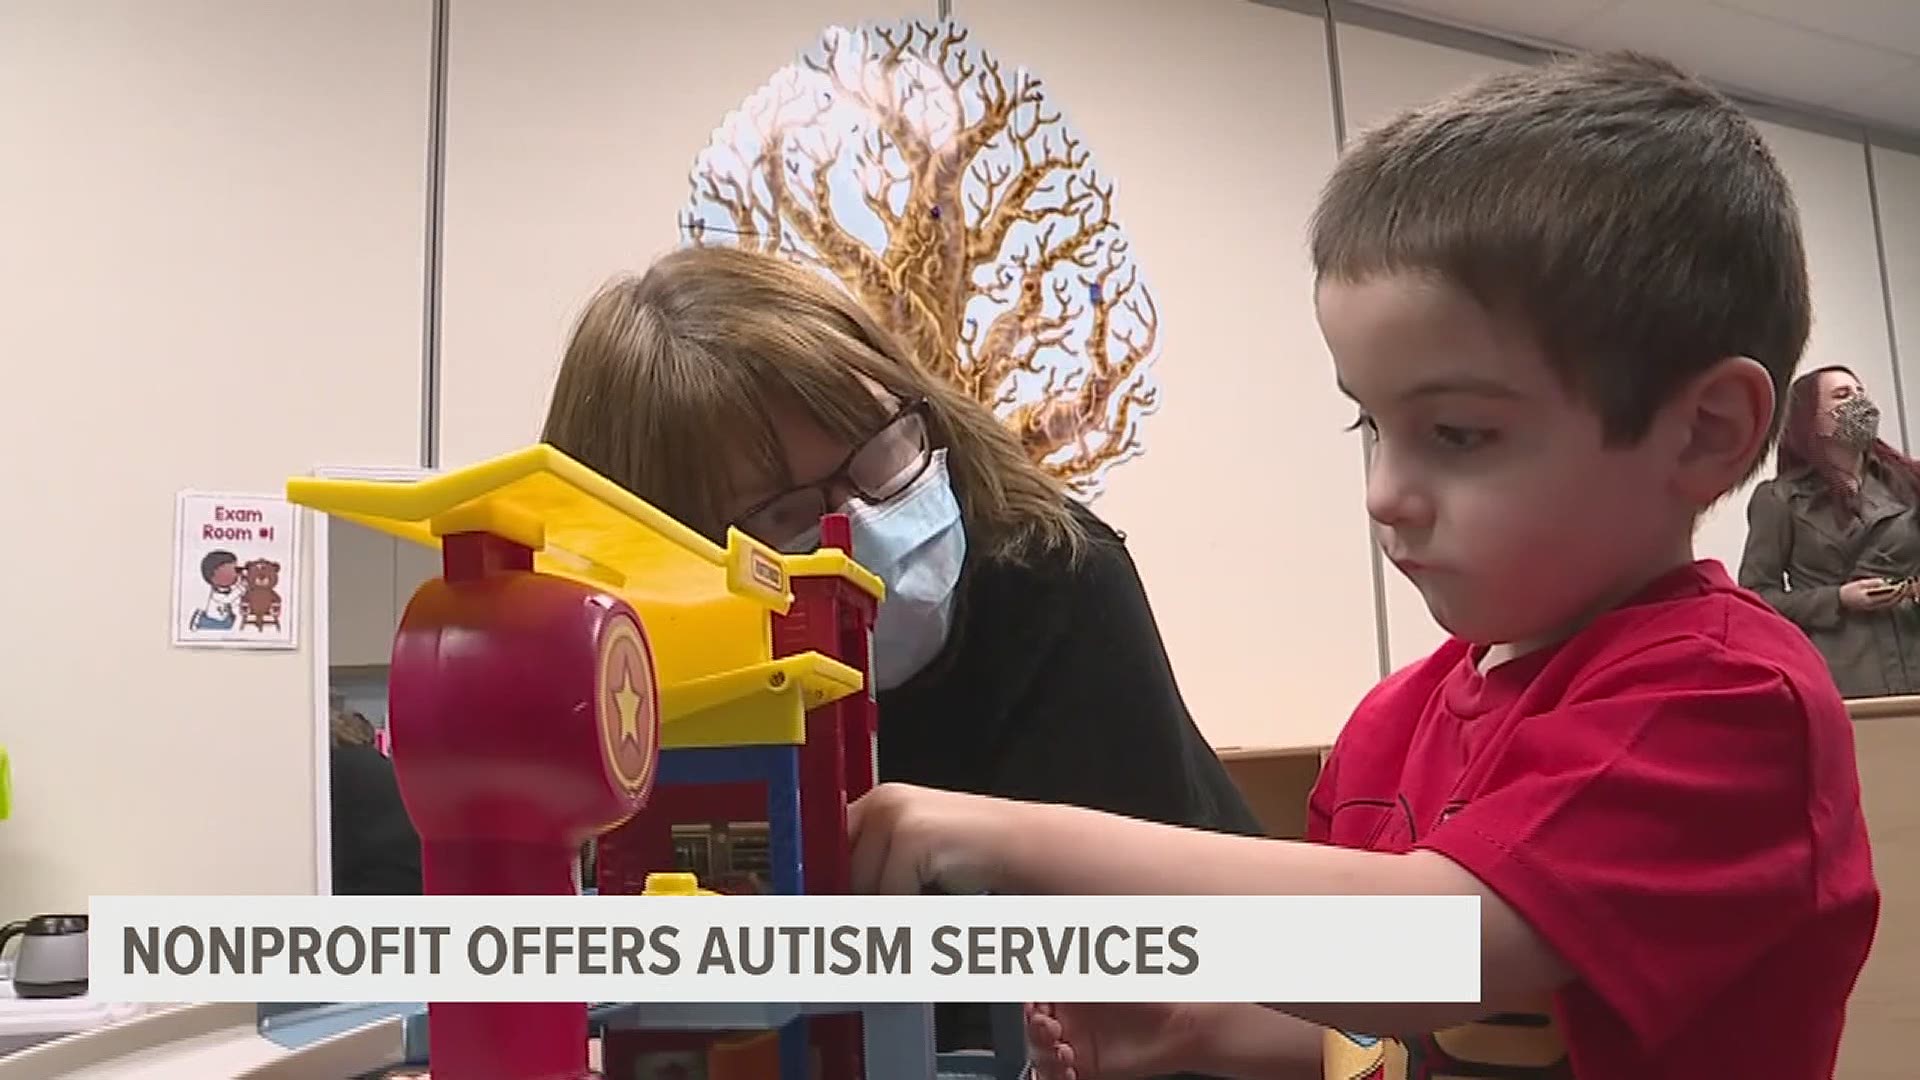 A Lancaster County mom found help for her son from Excentia Human Services, which provides services for people with developmental needs.